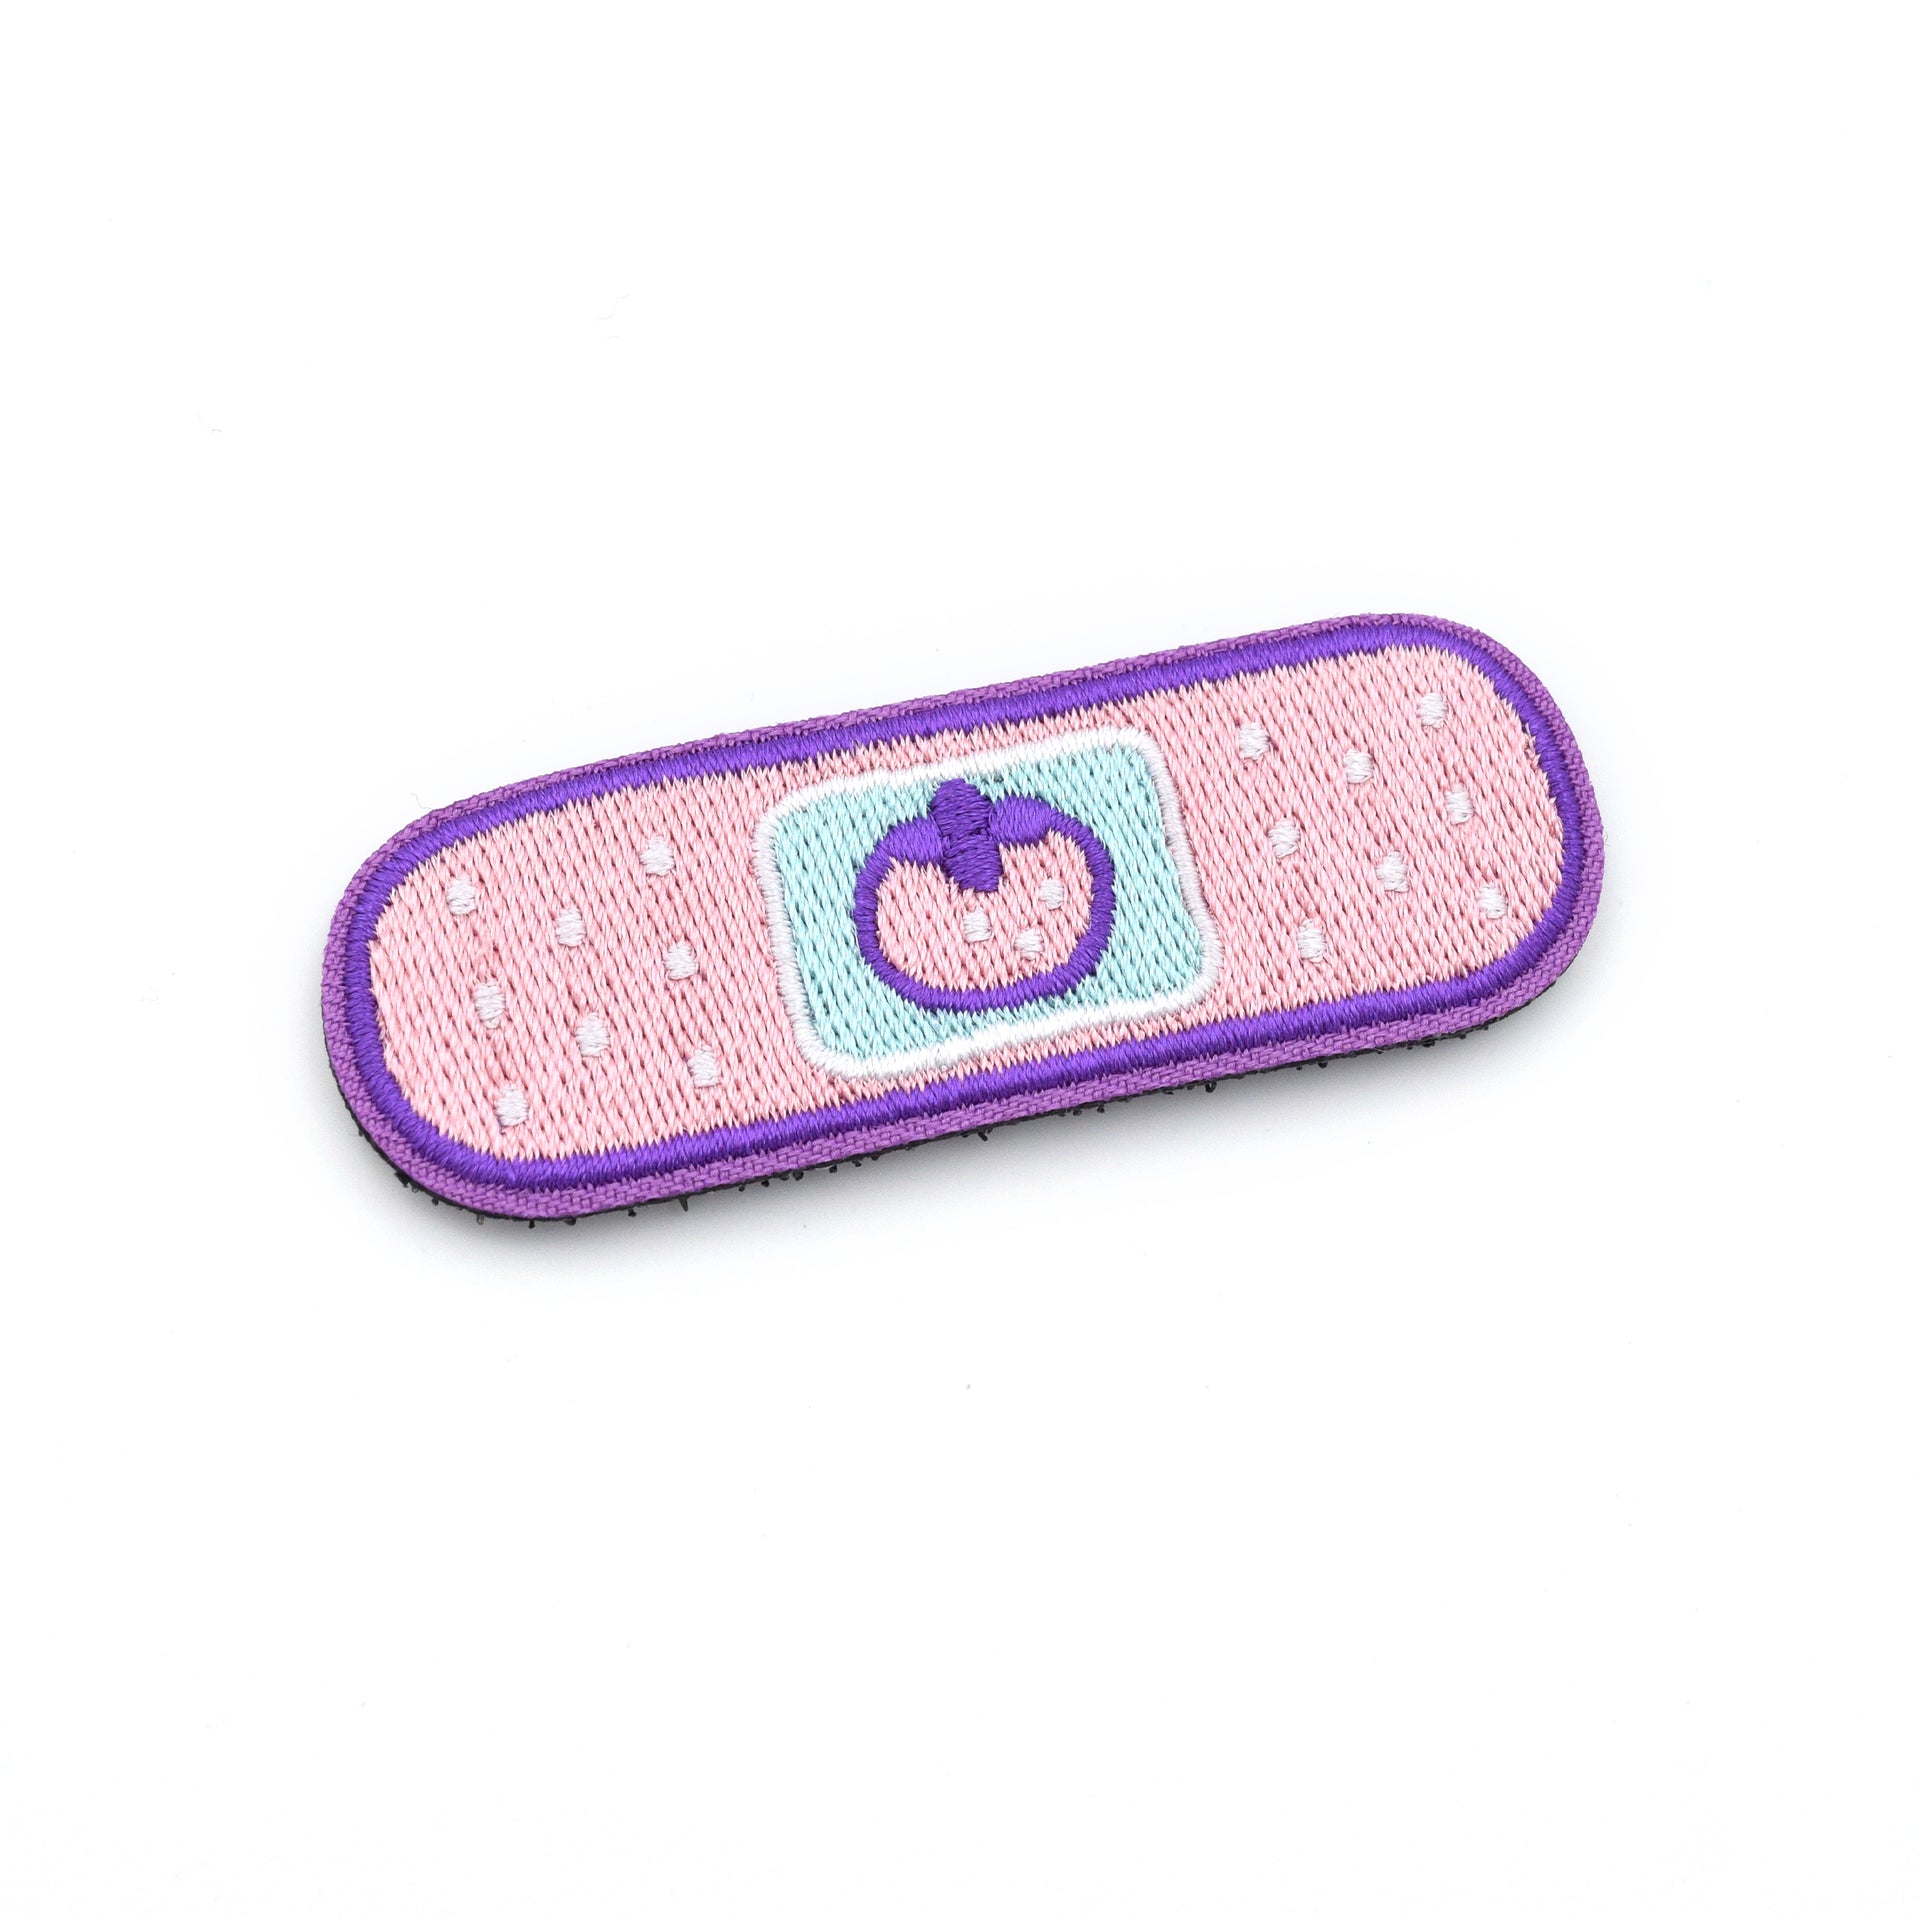 Berry Band-Aid Sticker Patch